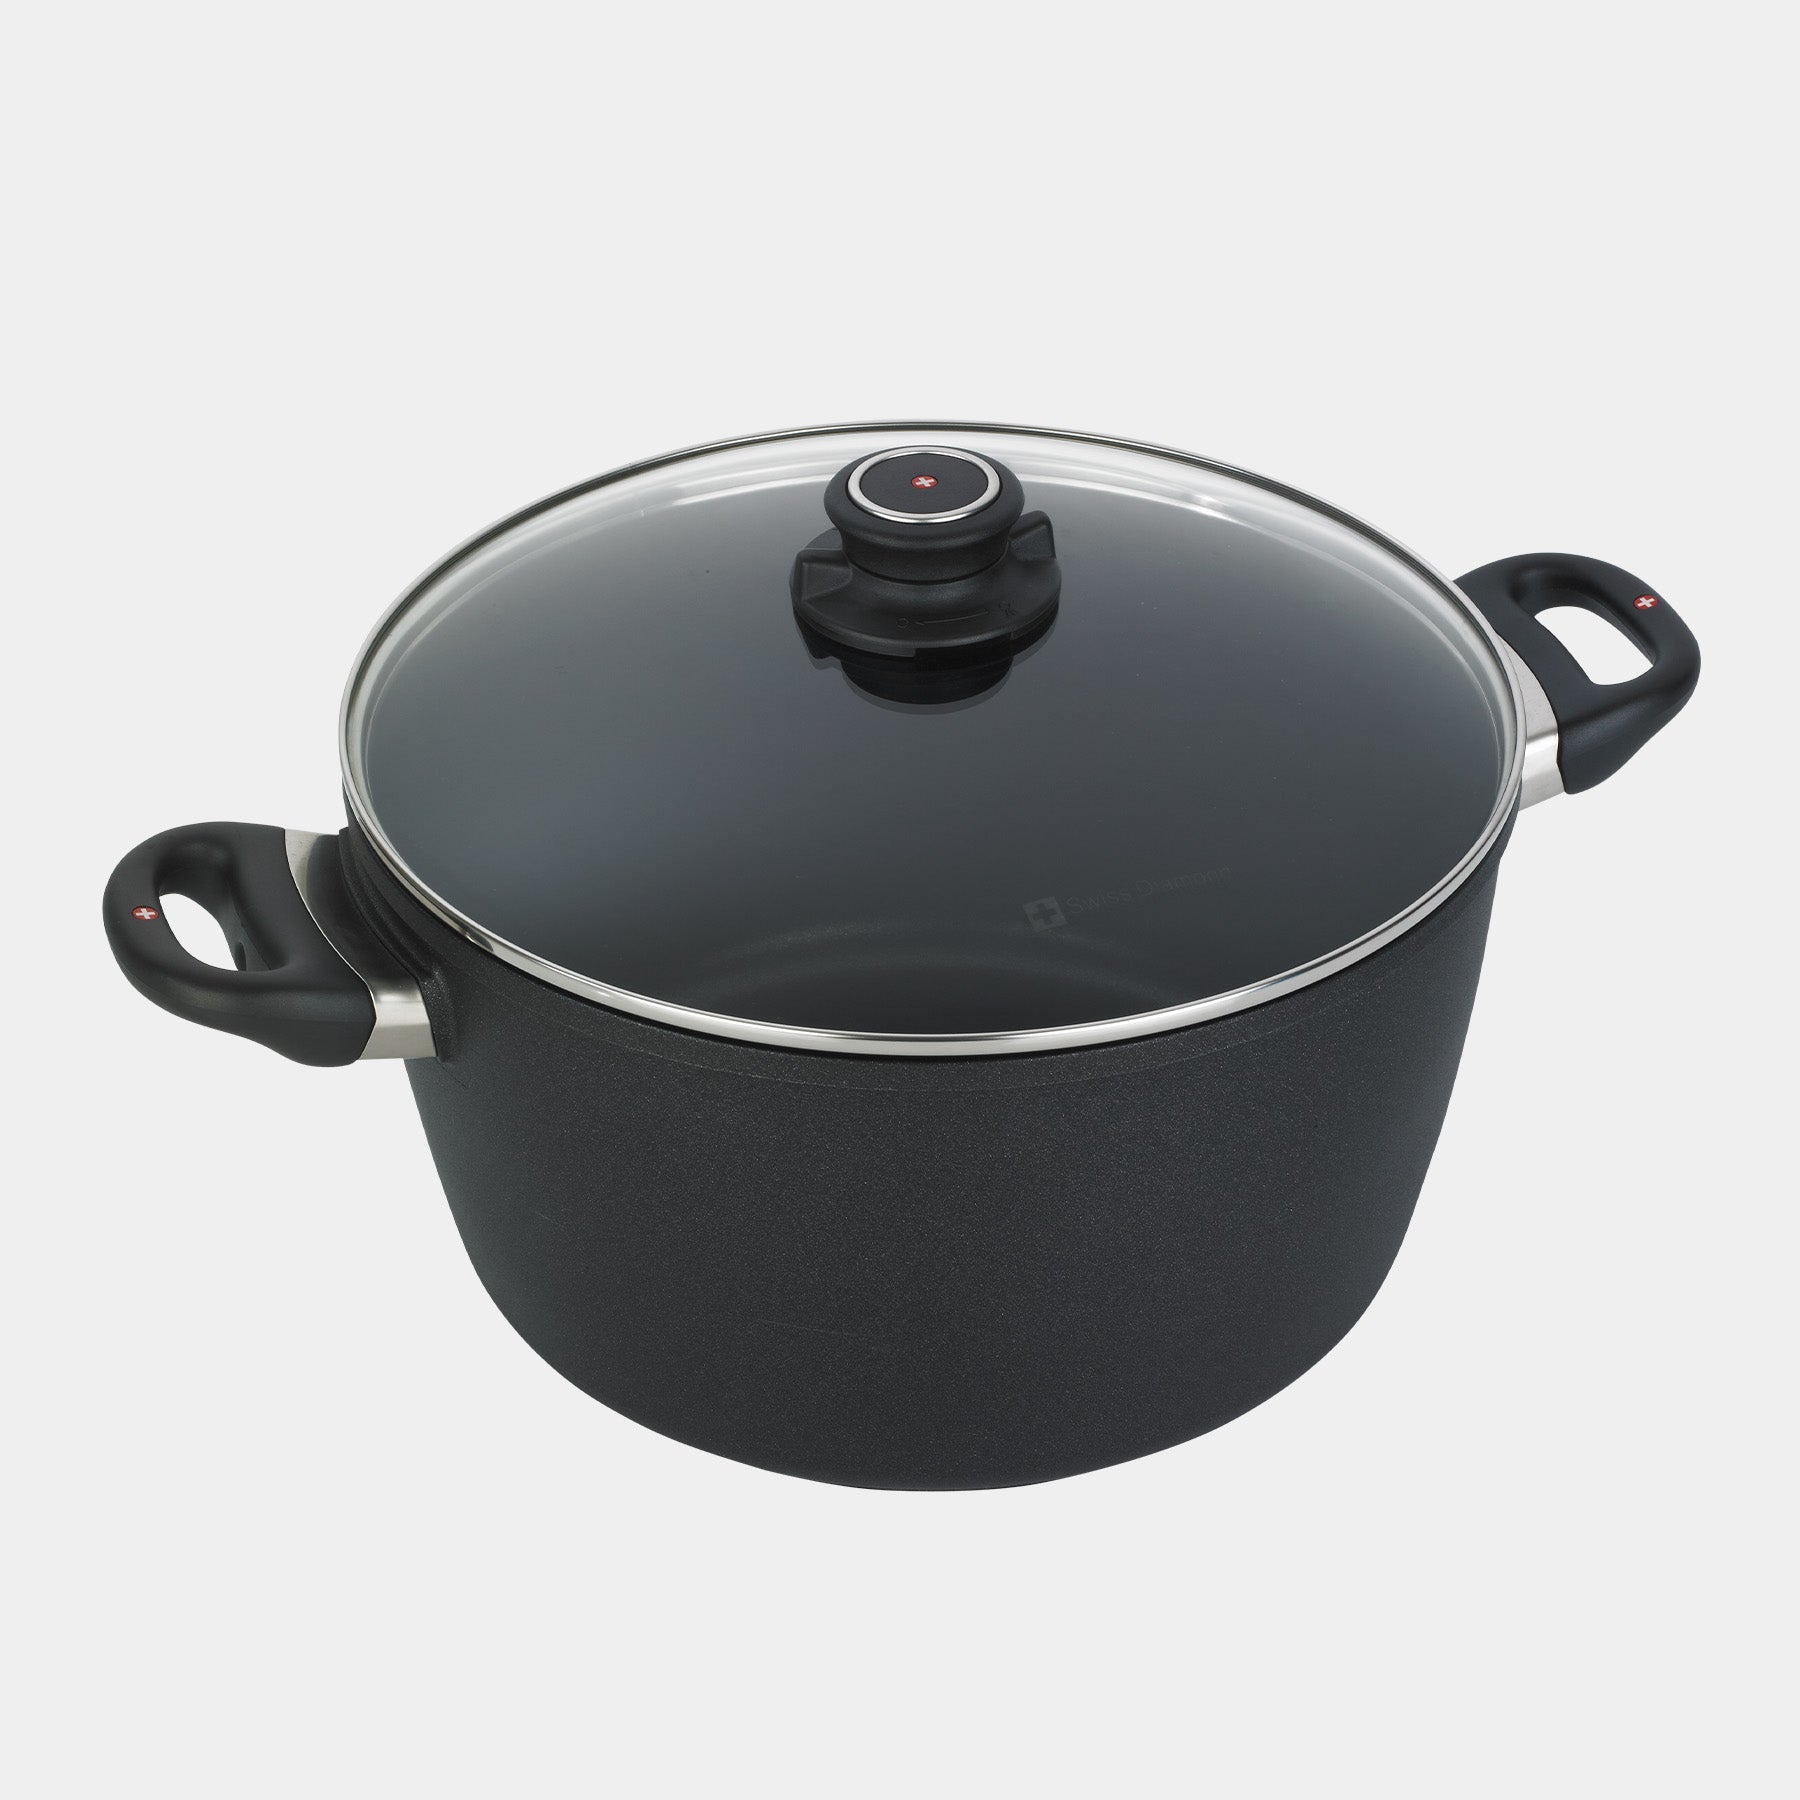 HD Nonstick 8.5 qt Stock Pot with Glass Lid - Induction